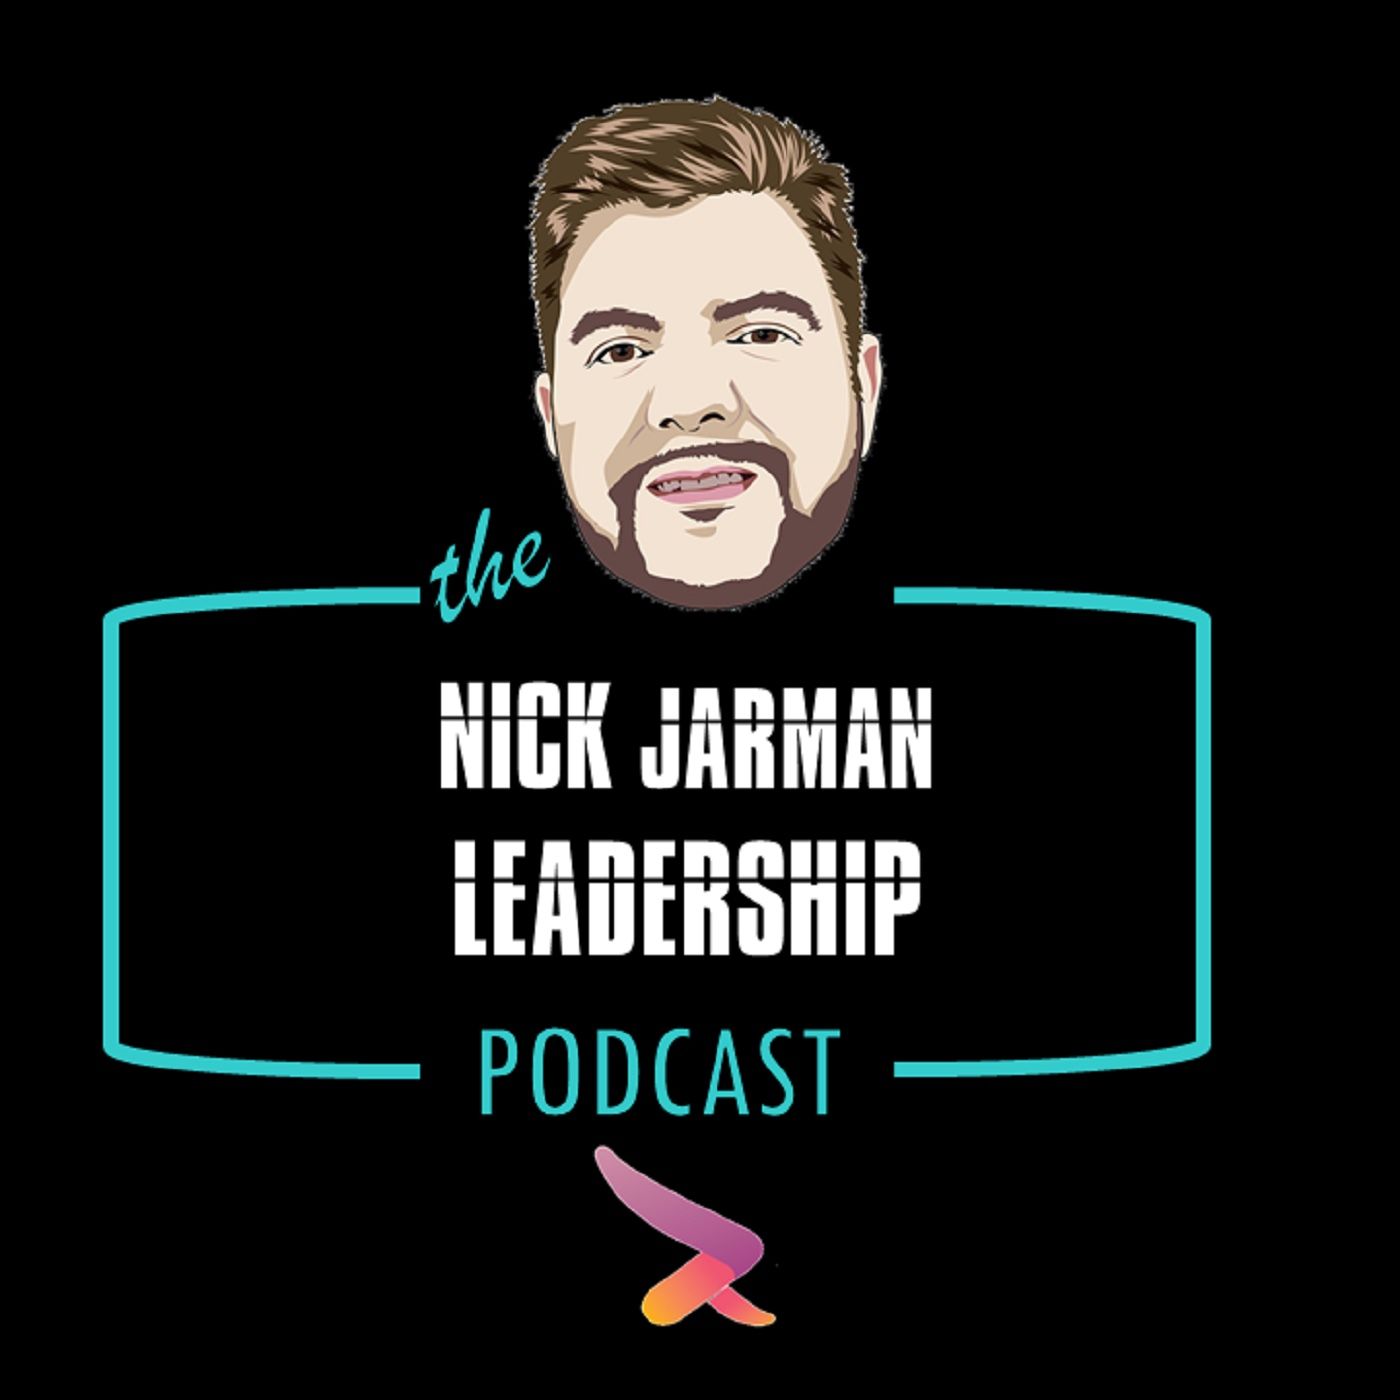 Episode 12: Interview with 2019 Jacksonville Person of the Year Matt Carlucci - The Nick Jarman Leadership Podcast